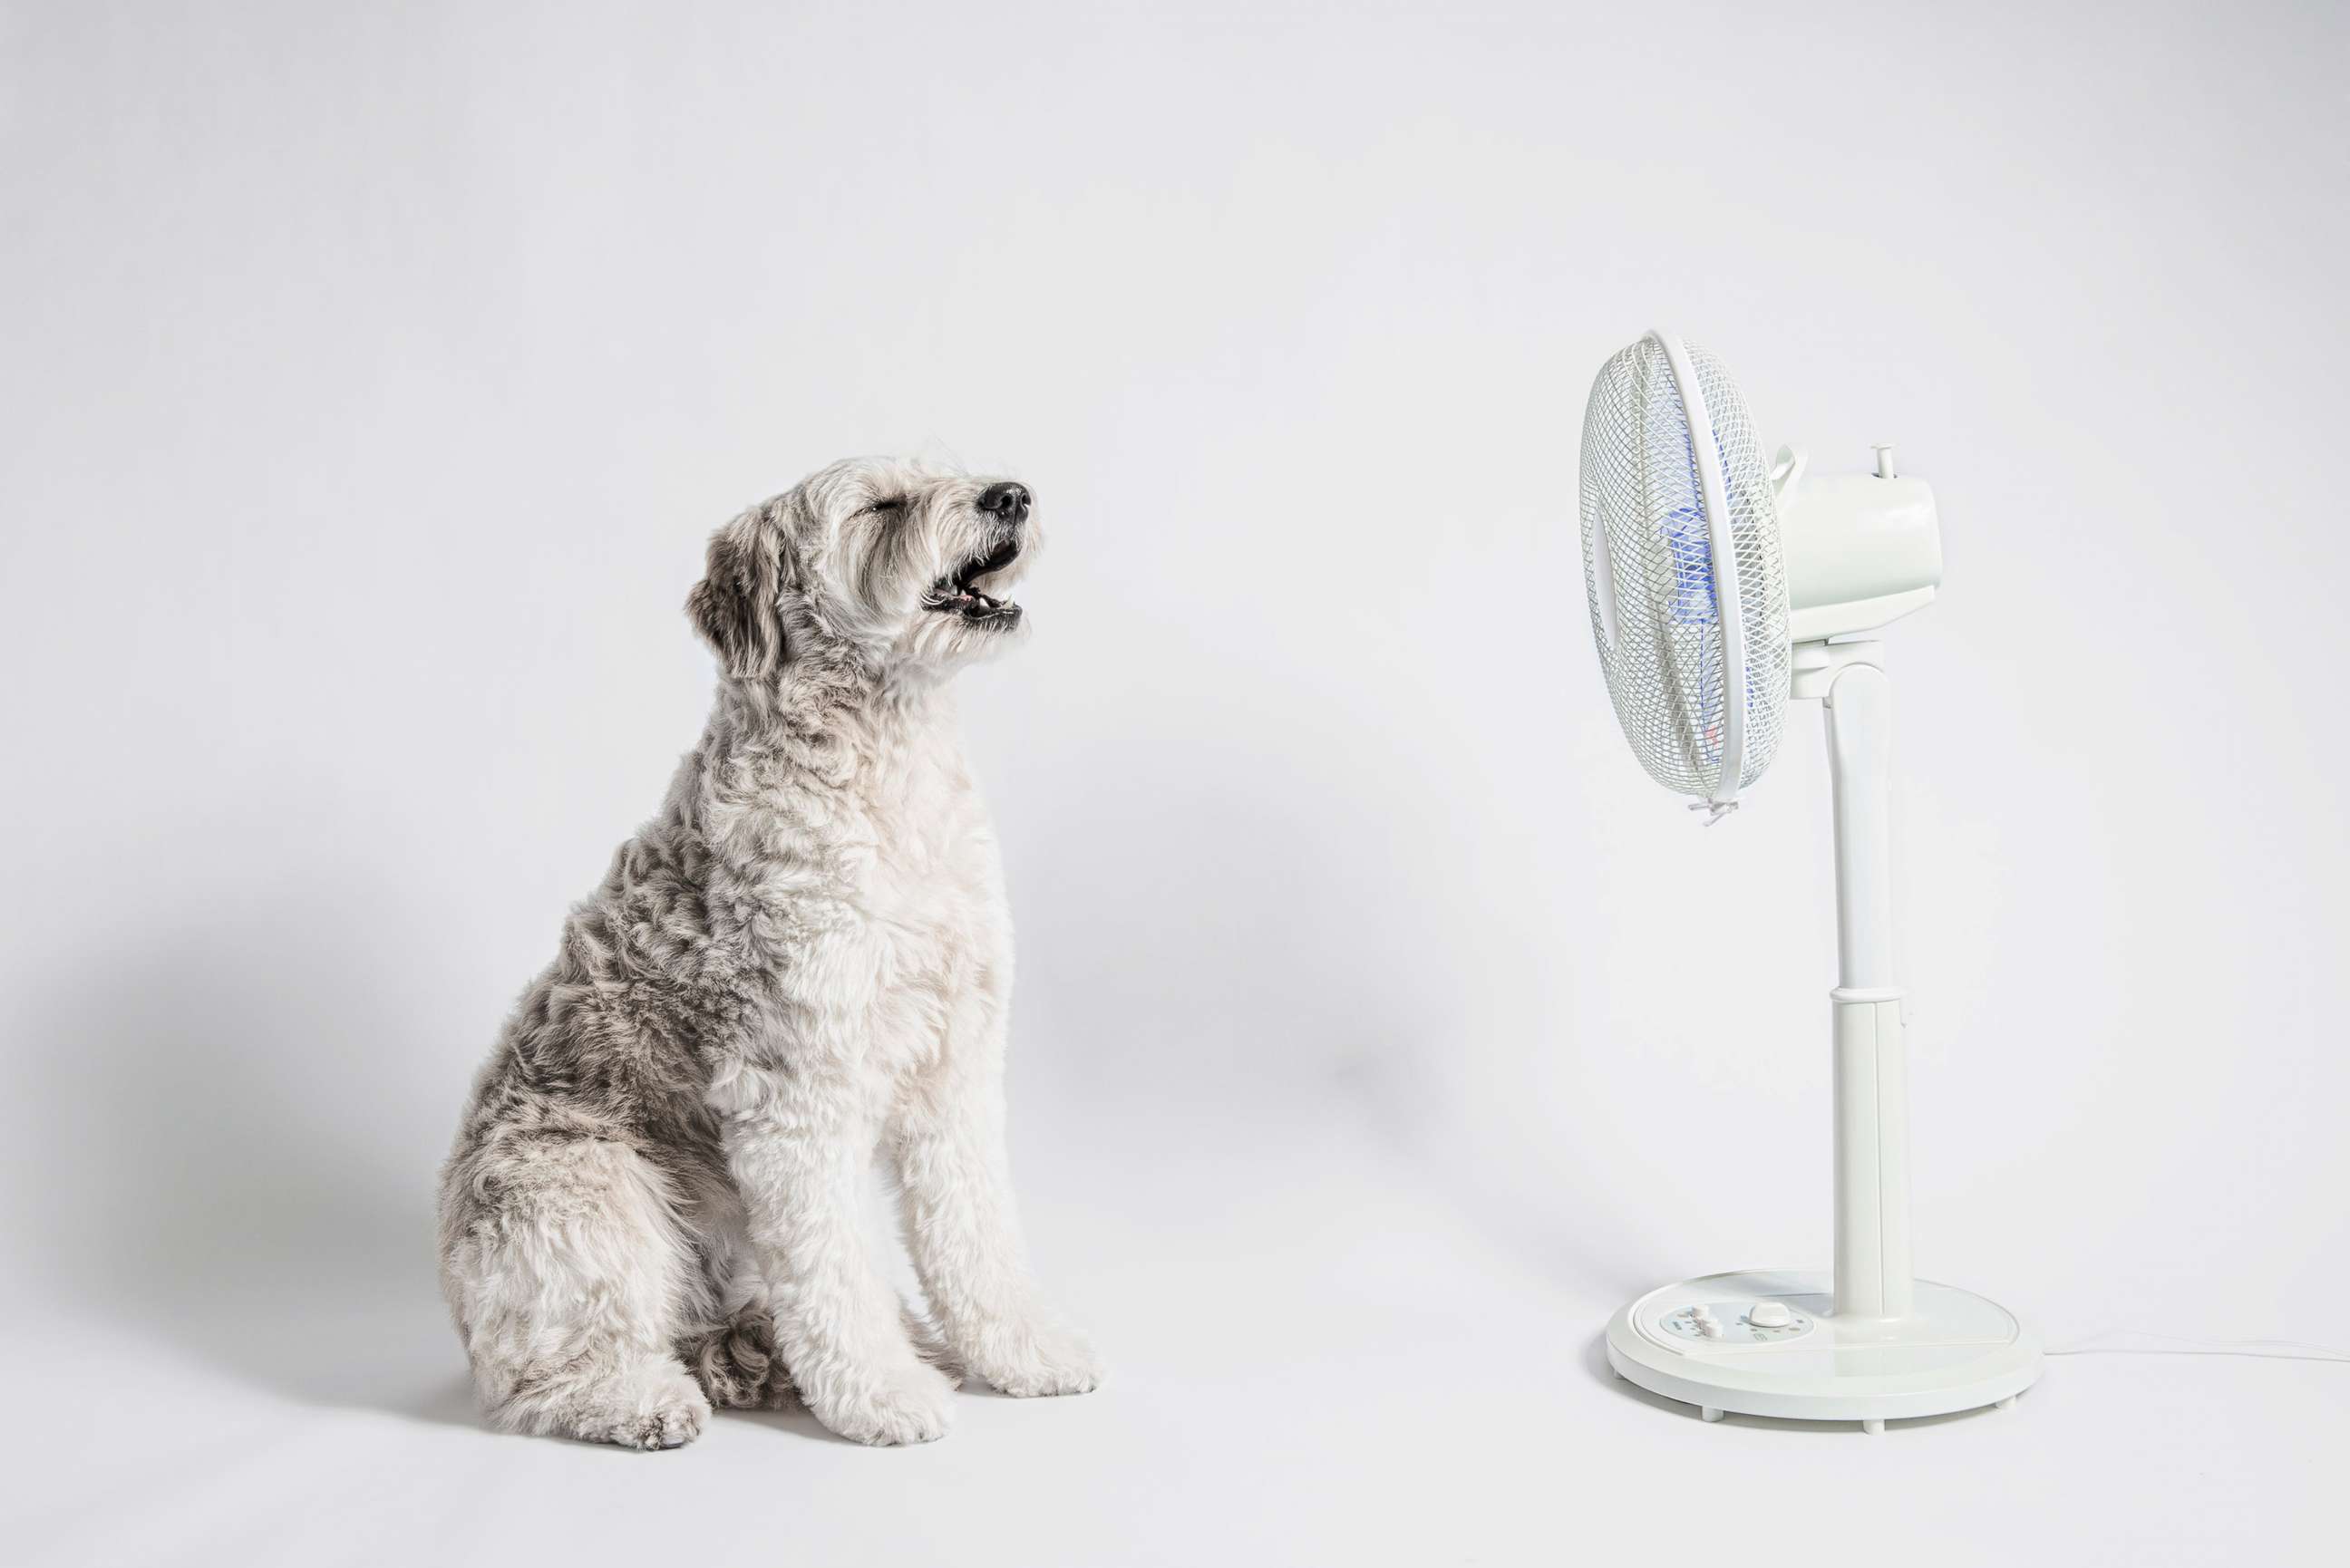 PHOTO: The dog sits in front of a fan.